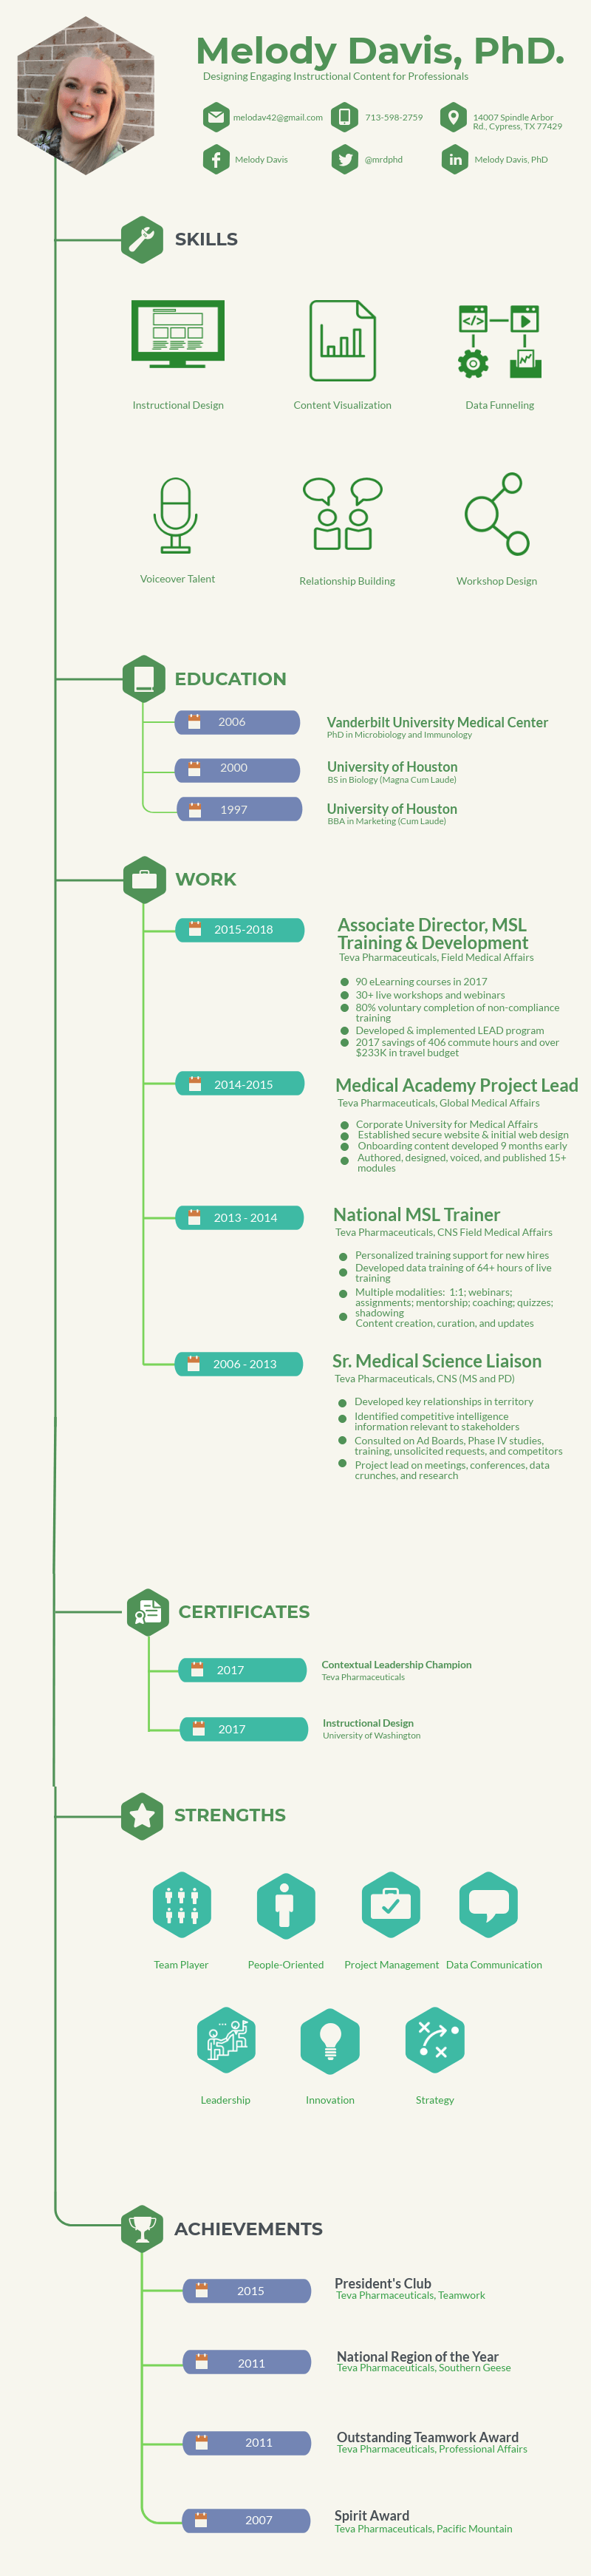 Infographic format of a resume for Melody Davis PhD